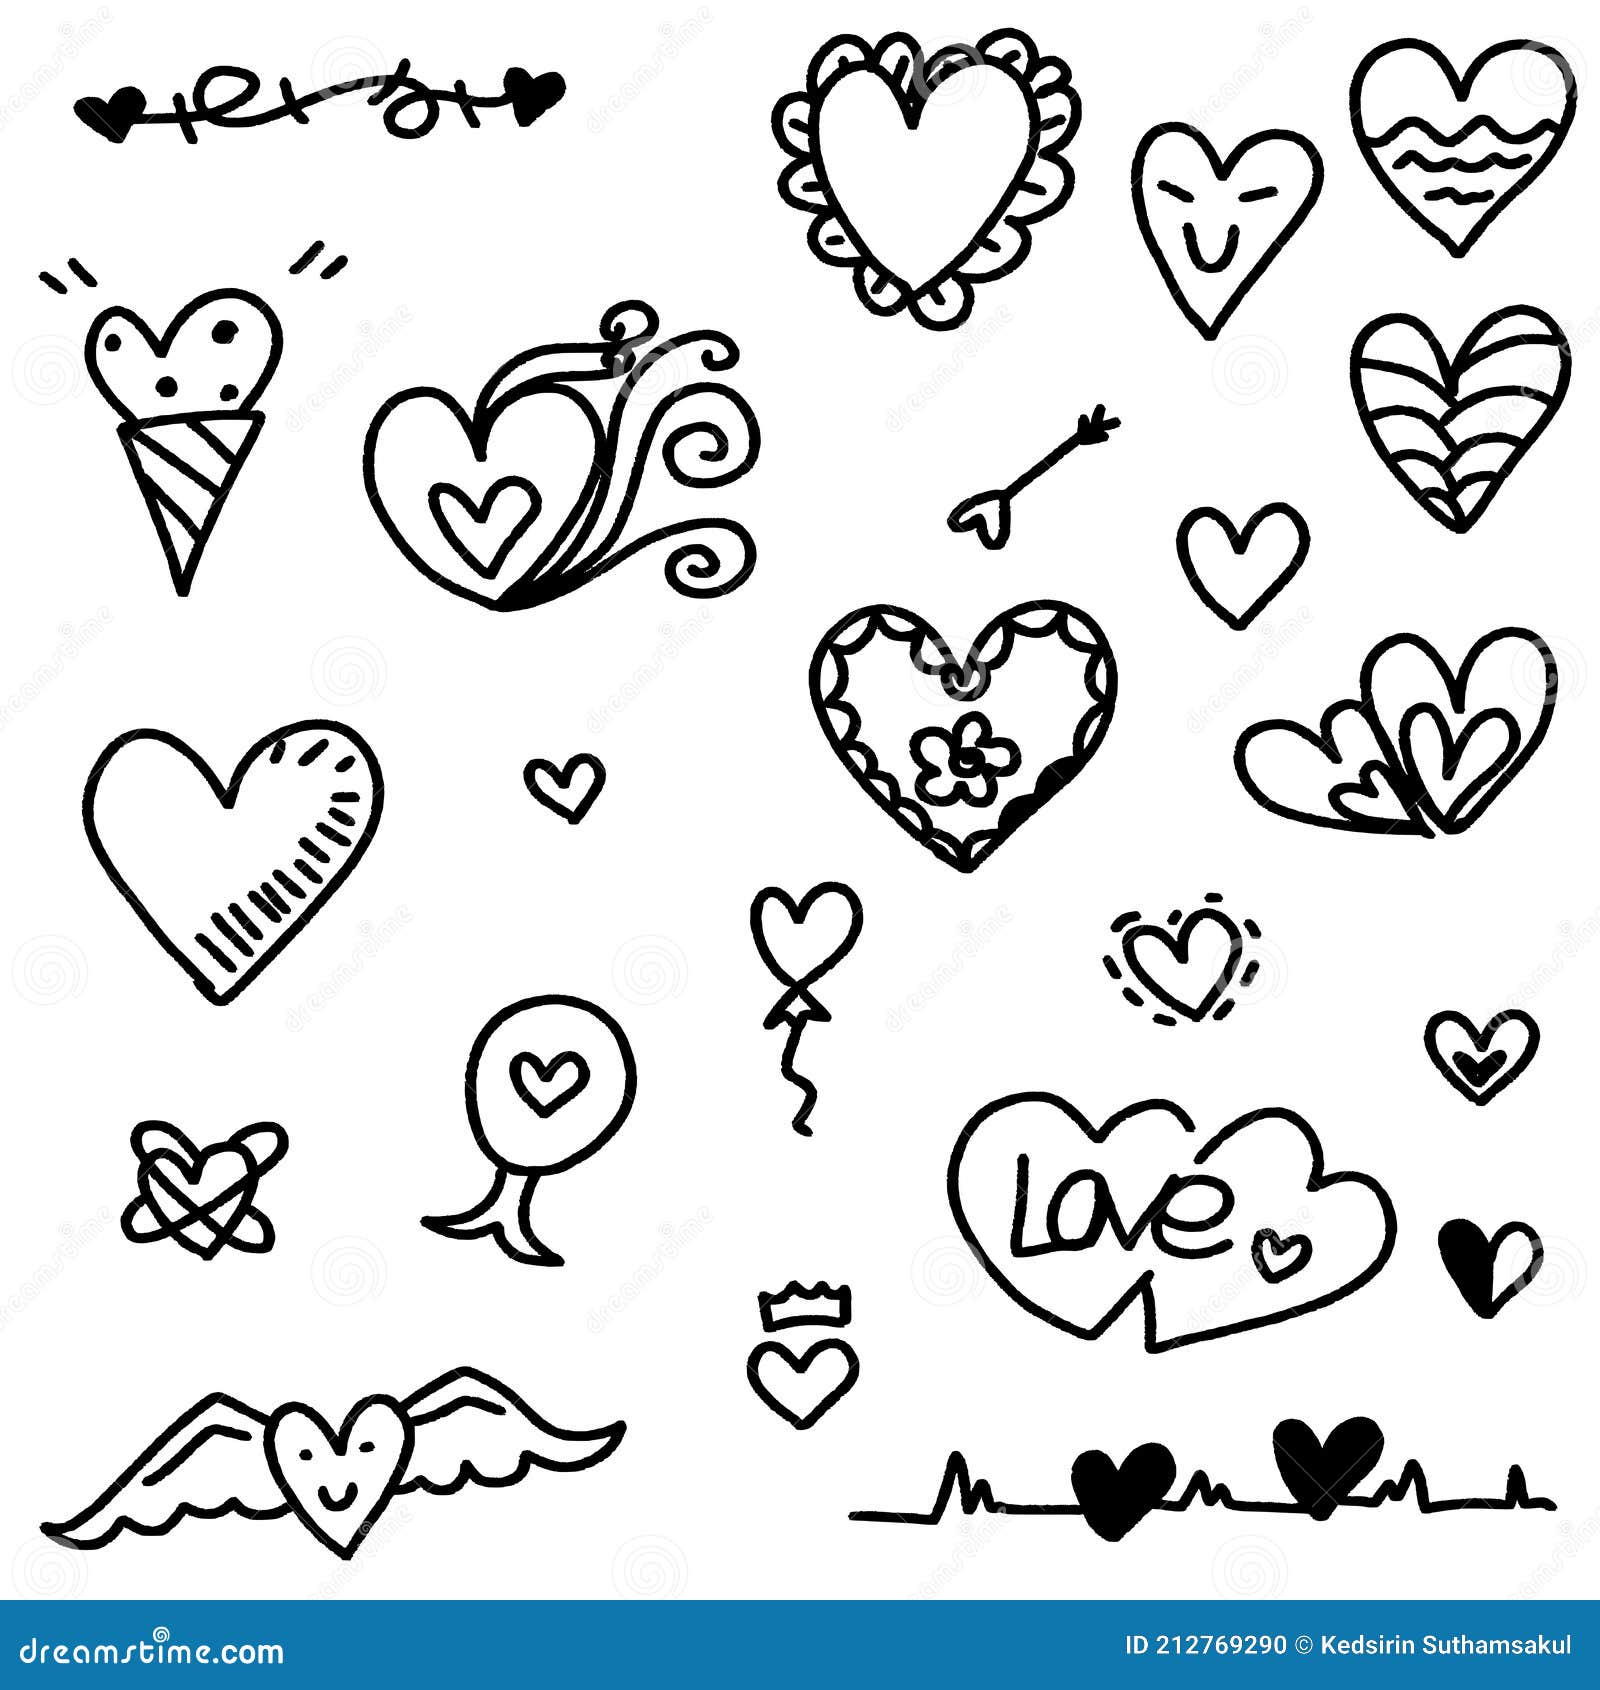 Hand Drawn Doodle Hearts Vector Designs on a White Background Stock ...